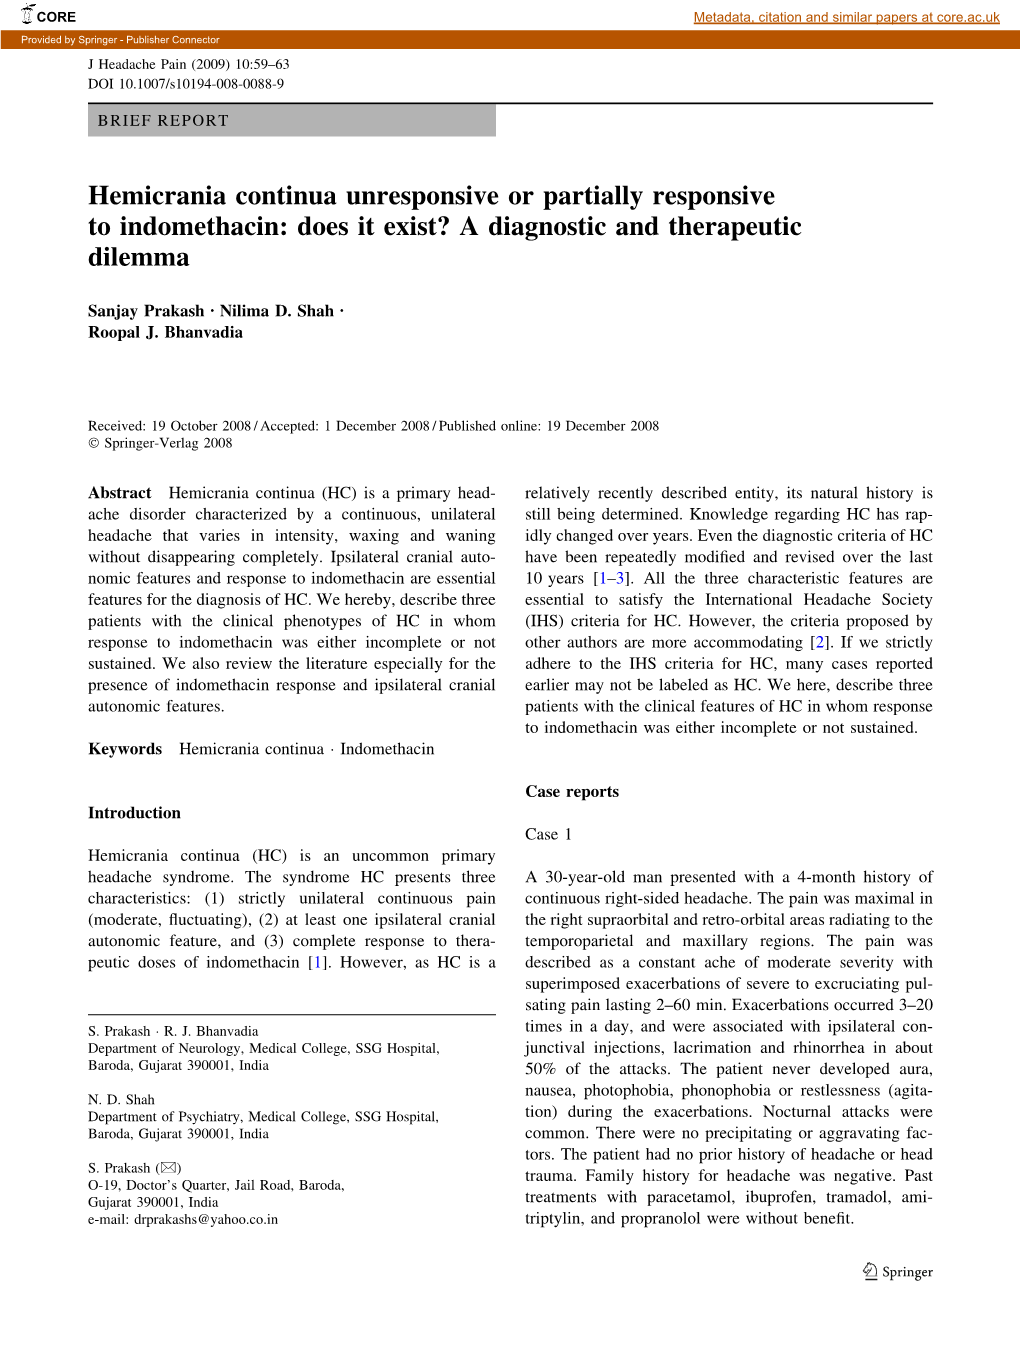 Hemicrania Continua Unresponsive Or Partially Responsive to Indomethacin: Does It Exist? a Diagnostic and Therapeutic Dilemma